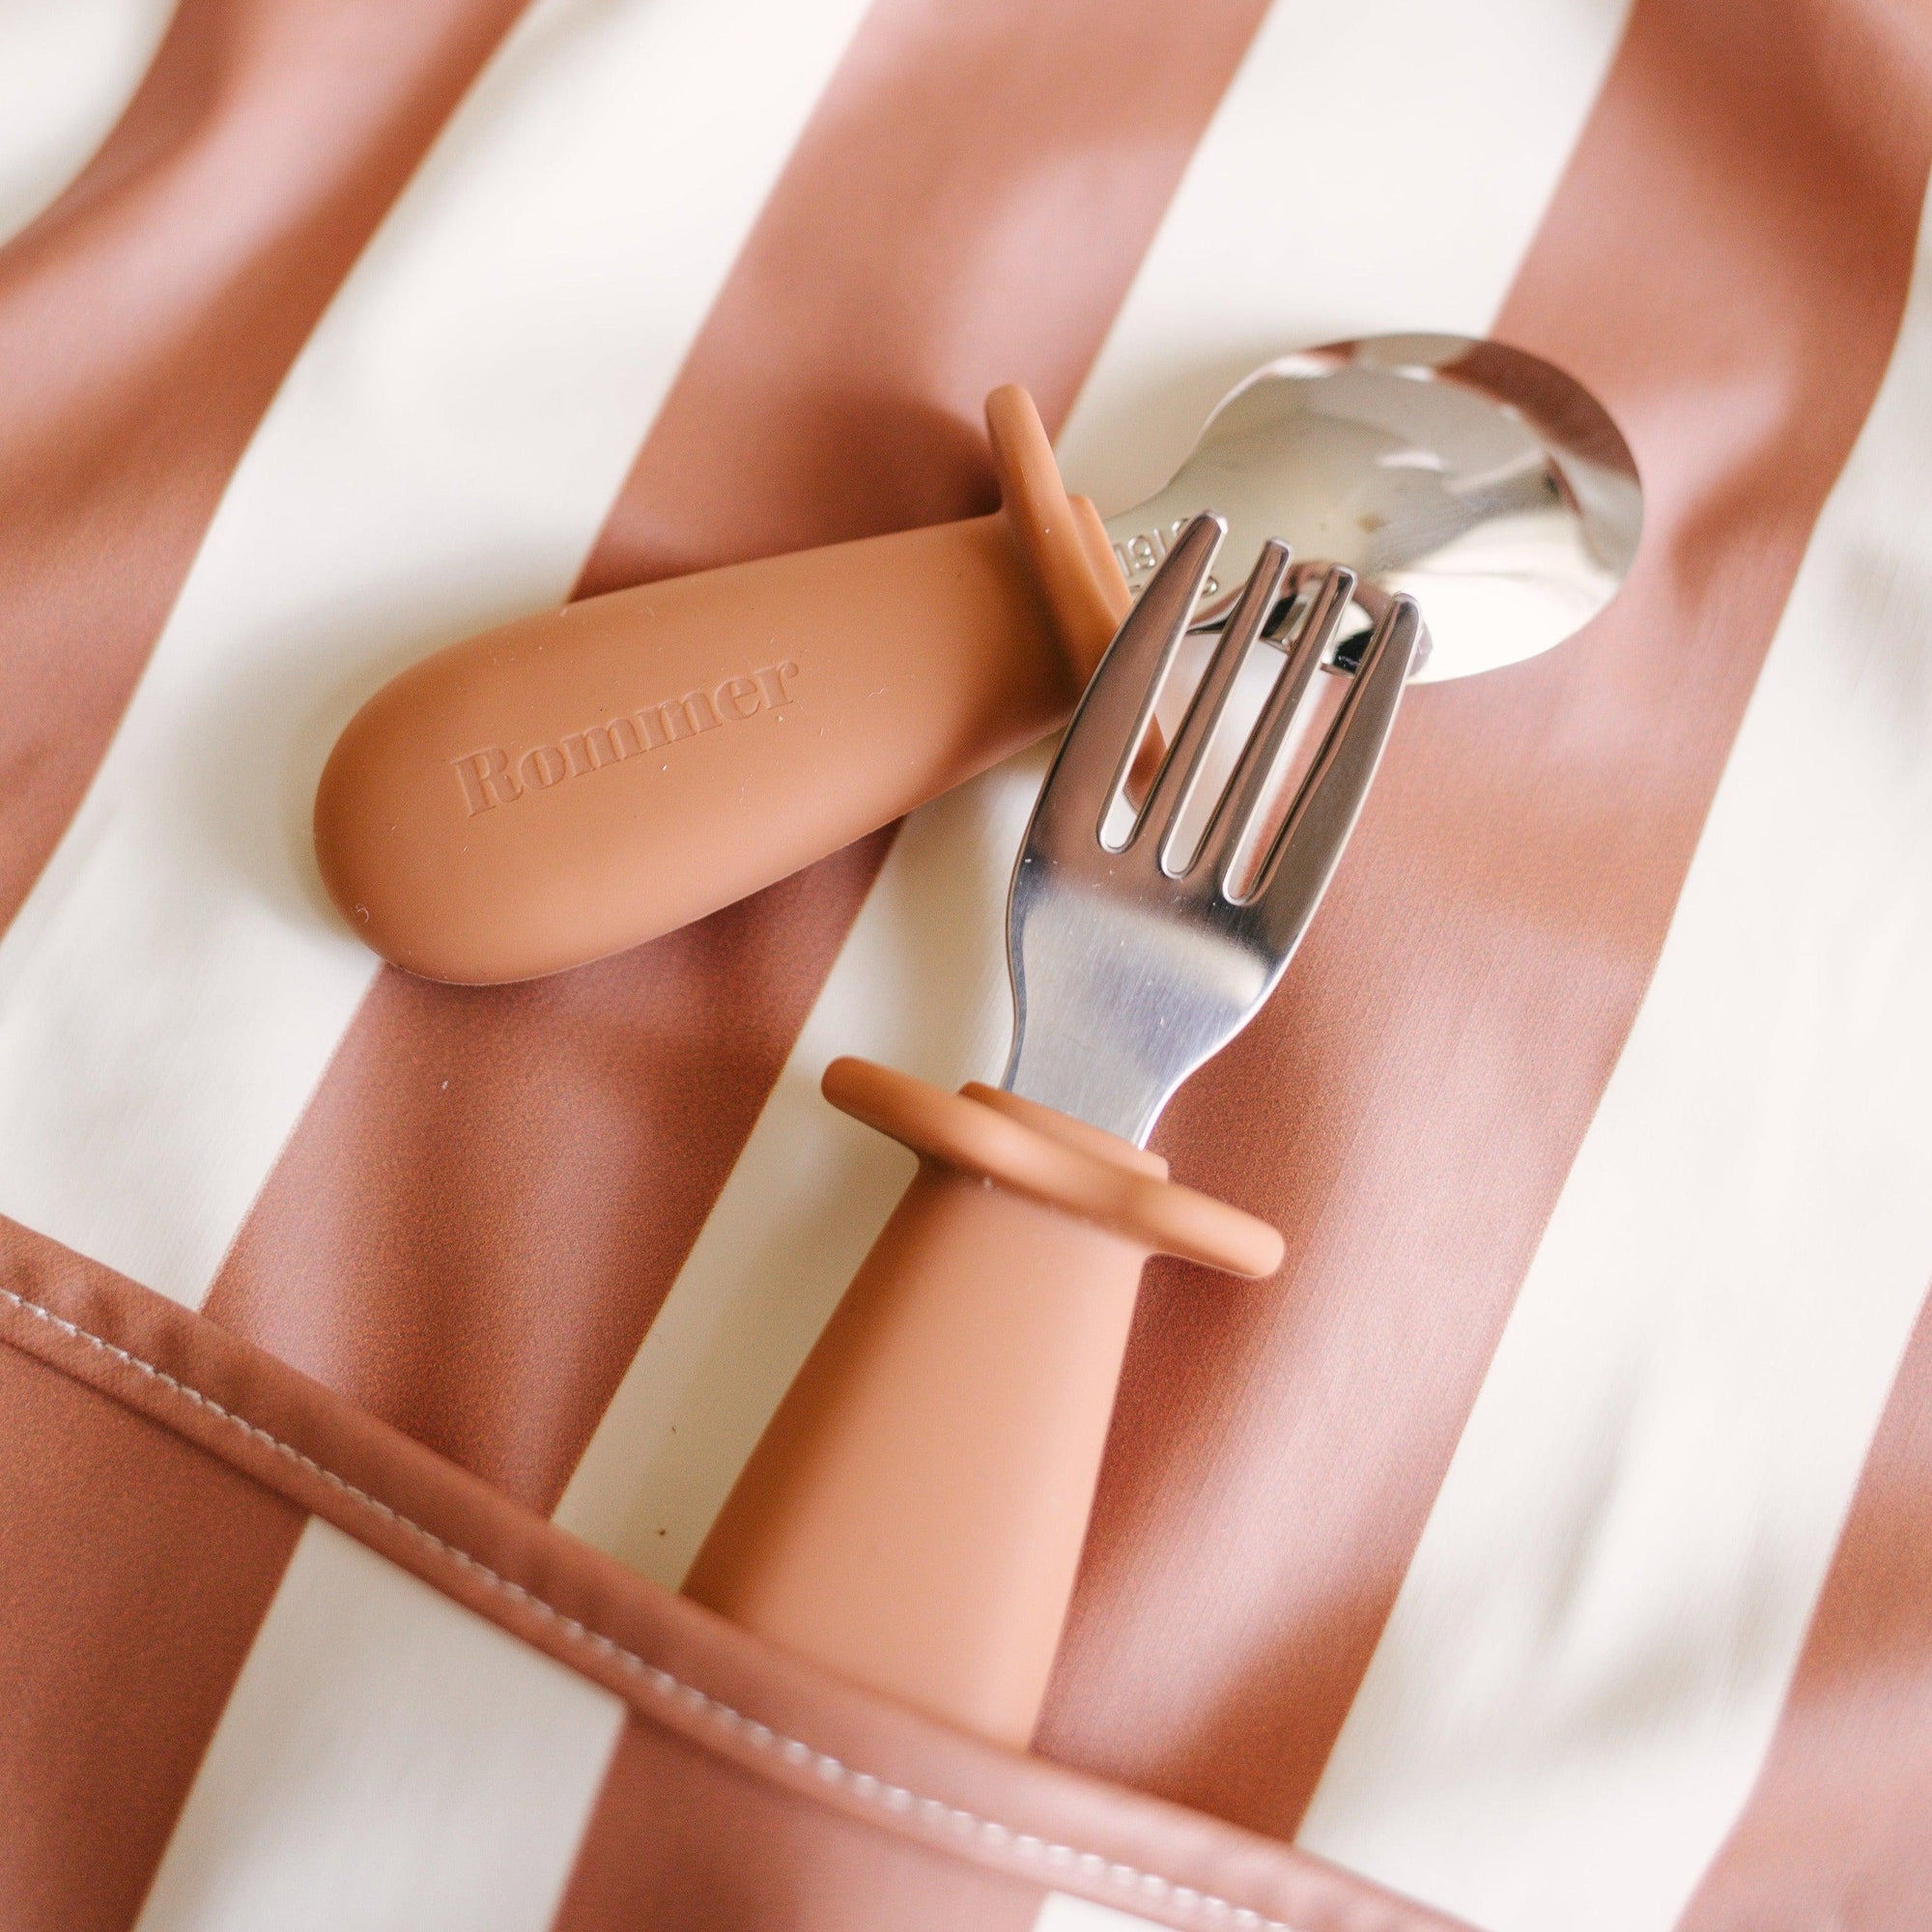 A Rommer toddler cutlery set in cinnamon, designed to encourage independence during mealtime for curious little hands, neatly stored in a striped bag.